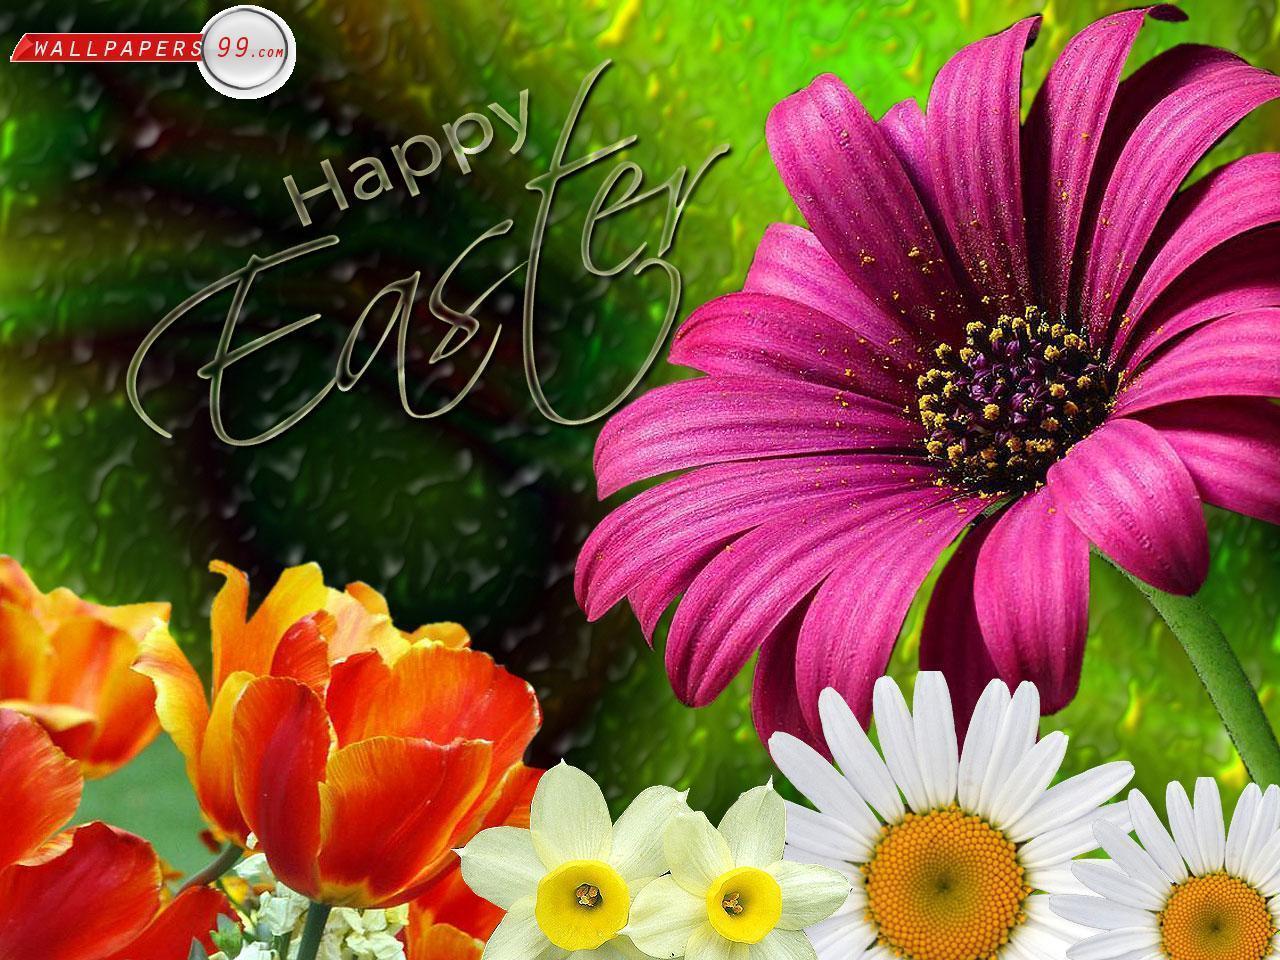 Happy Easter Wallpaper Picture Image 1280x960 35606